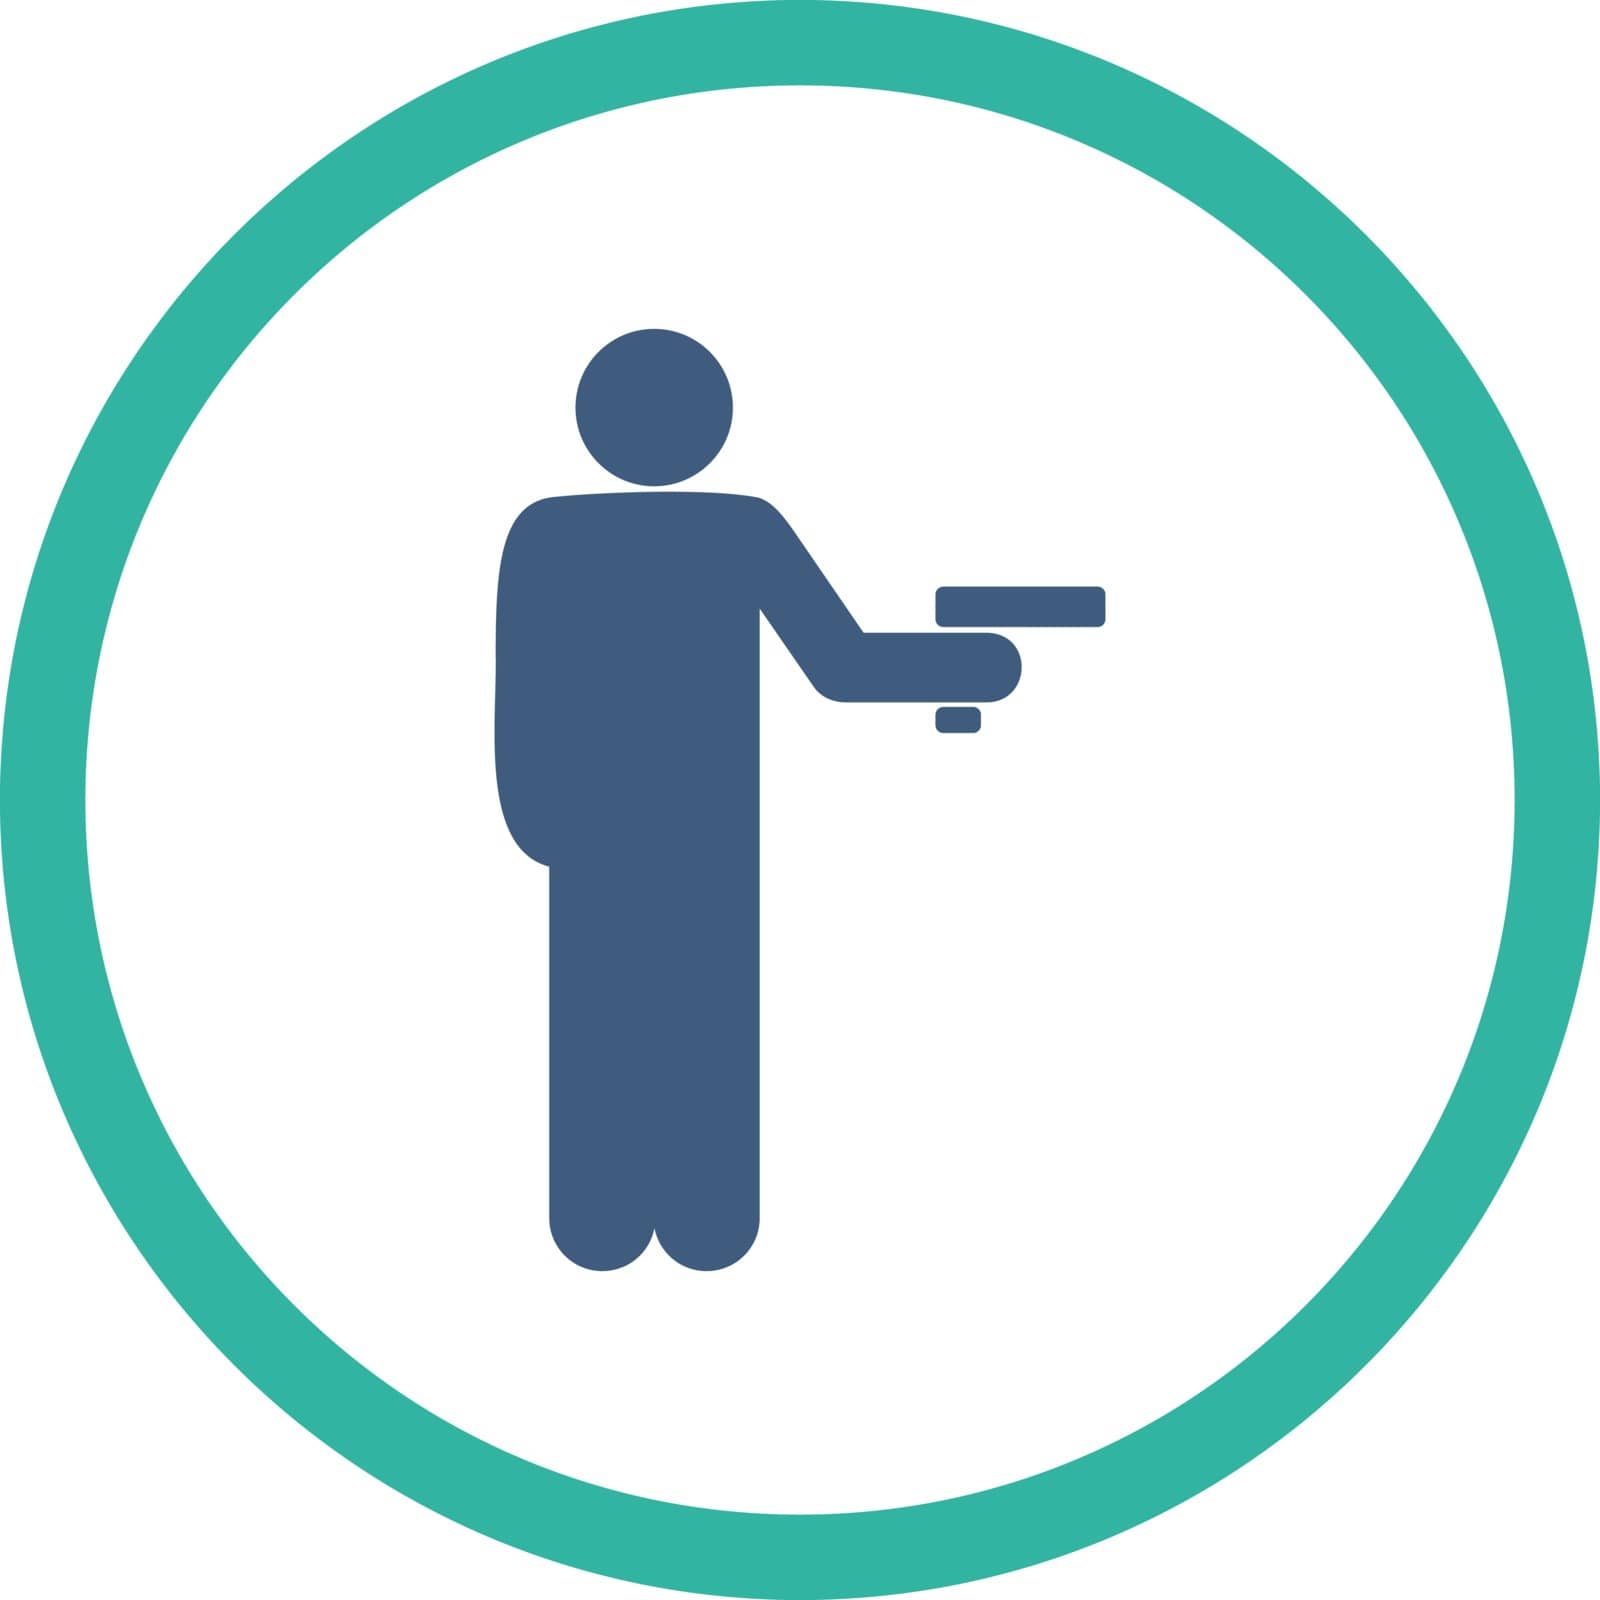 Robbery vector icon. This rounded flat symbol is drawn with cobalt and cyan colors on a white background.